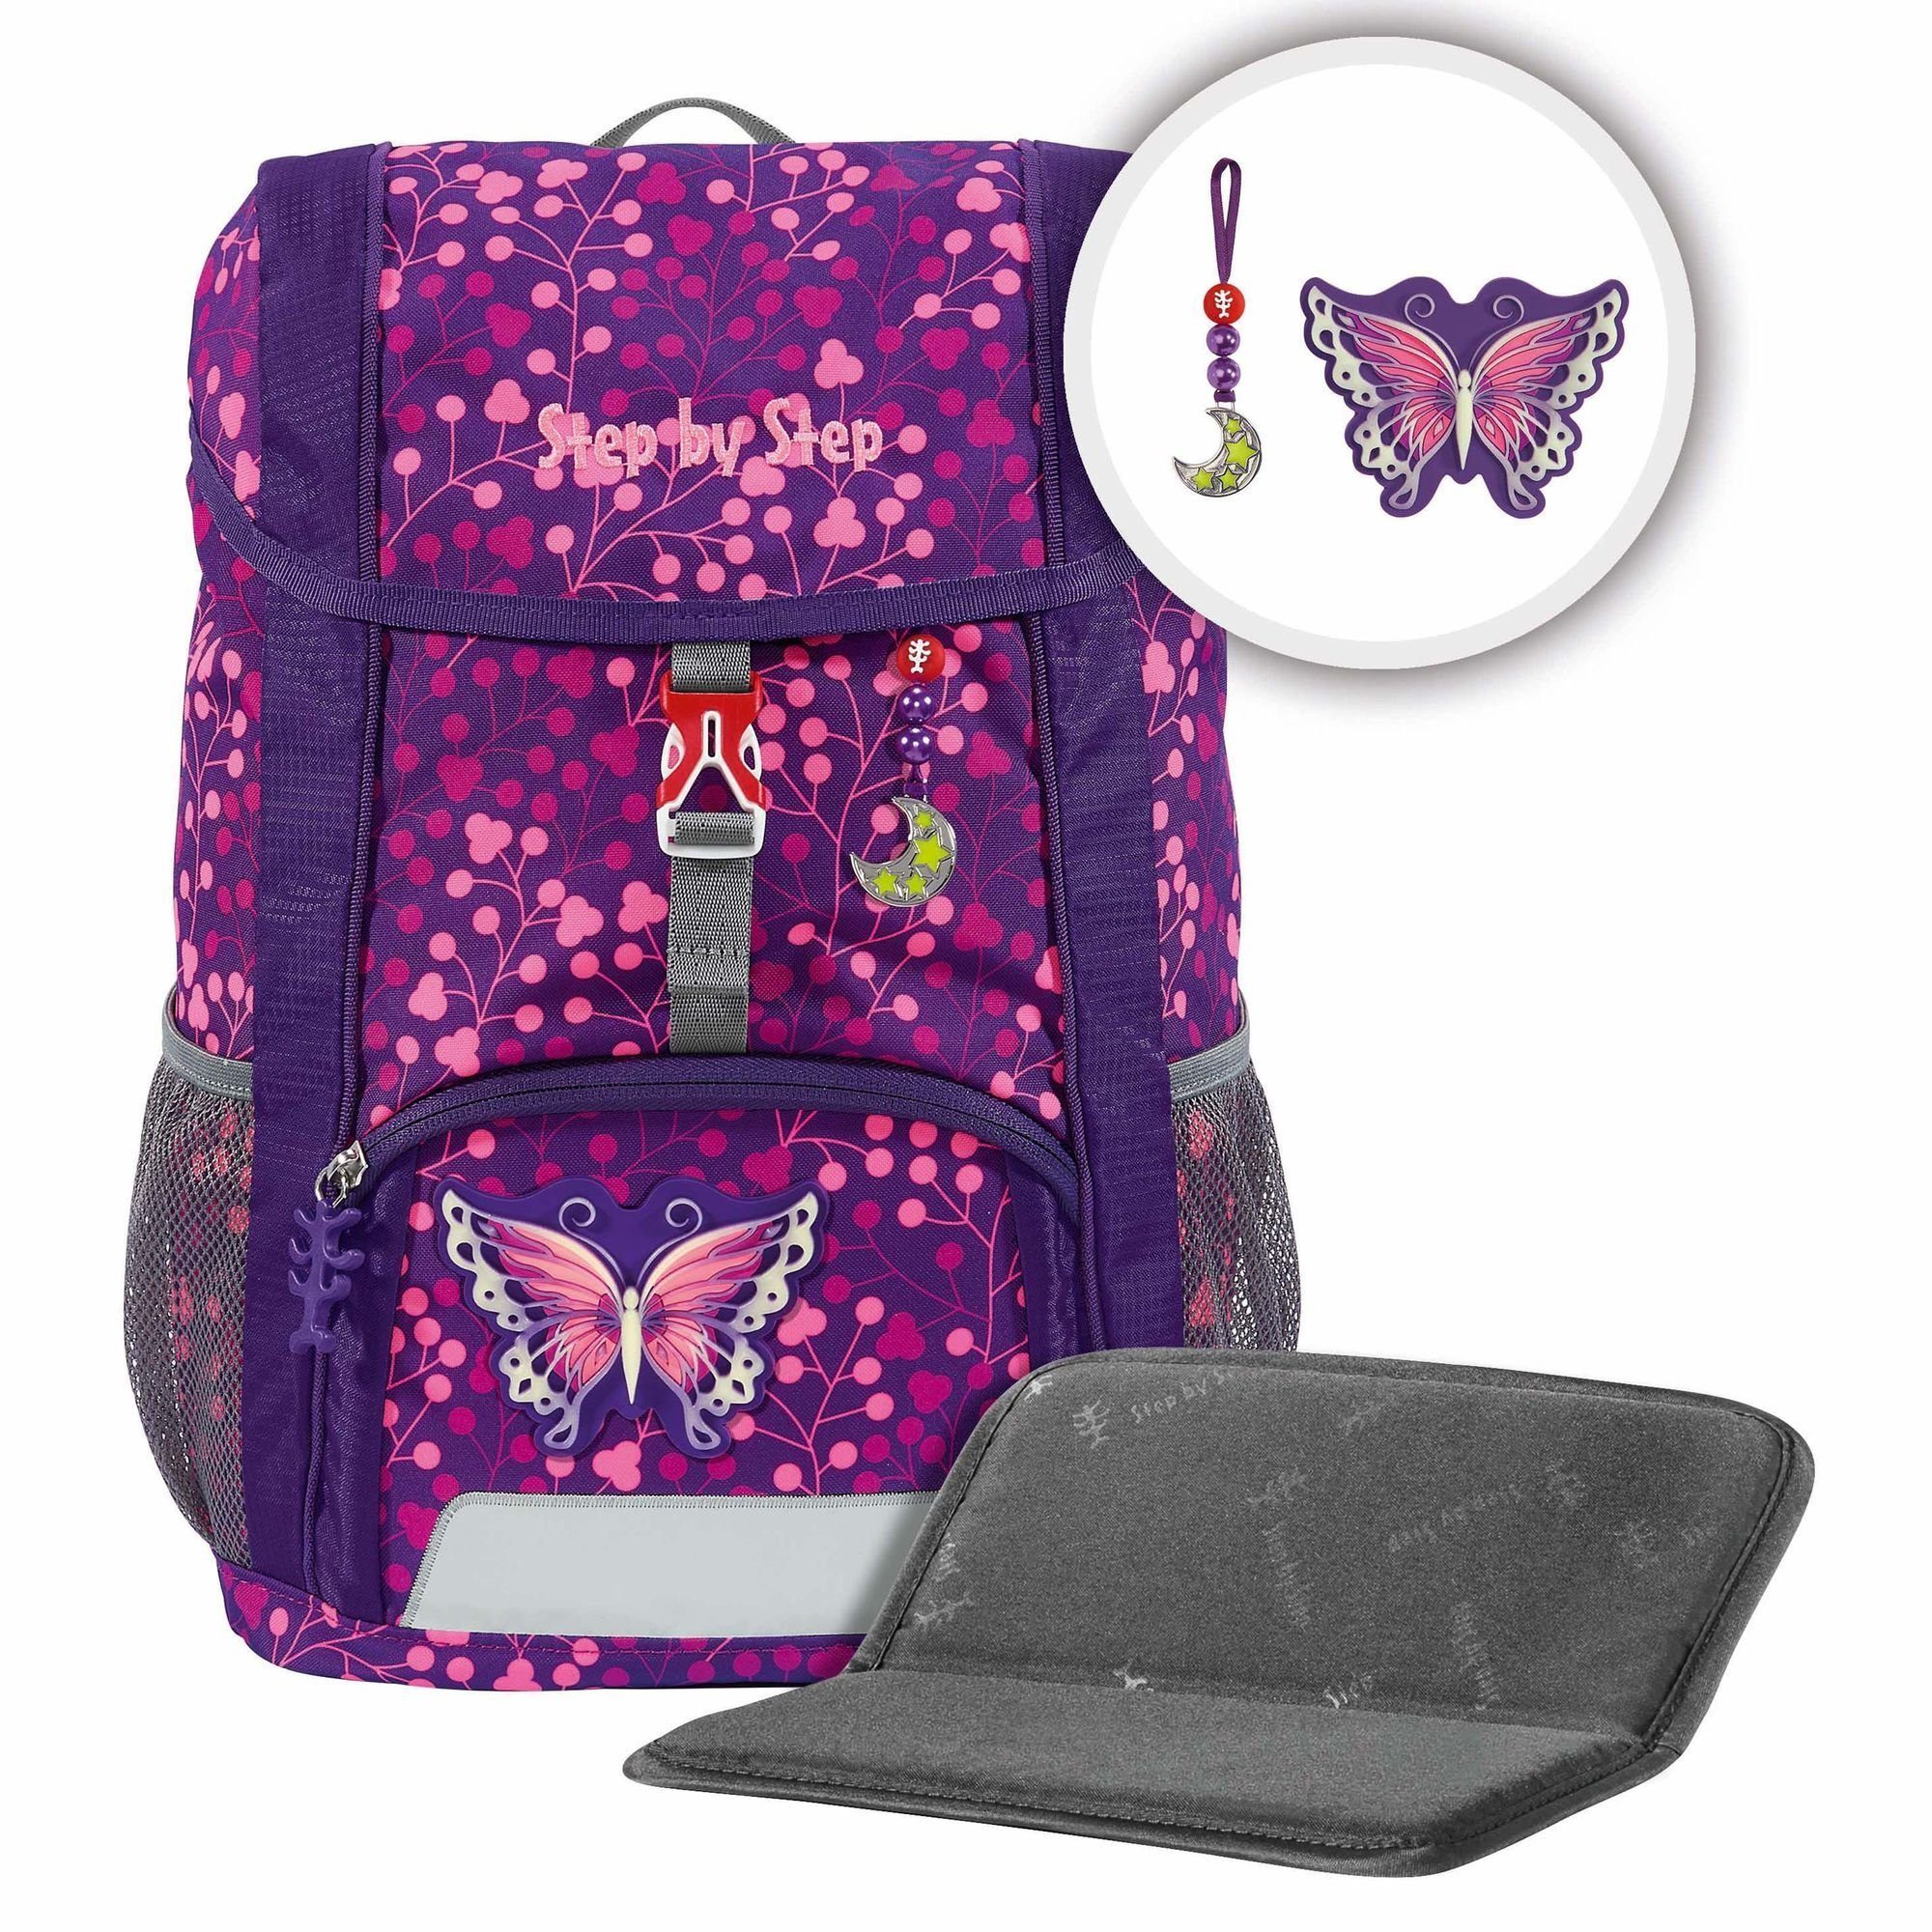 Shine, Step Kinderrucksack by Polyester Kid night Step ina butterfly